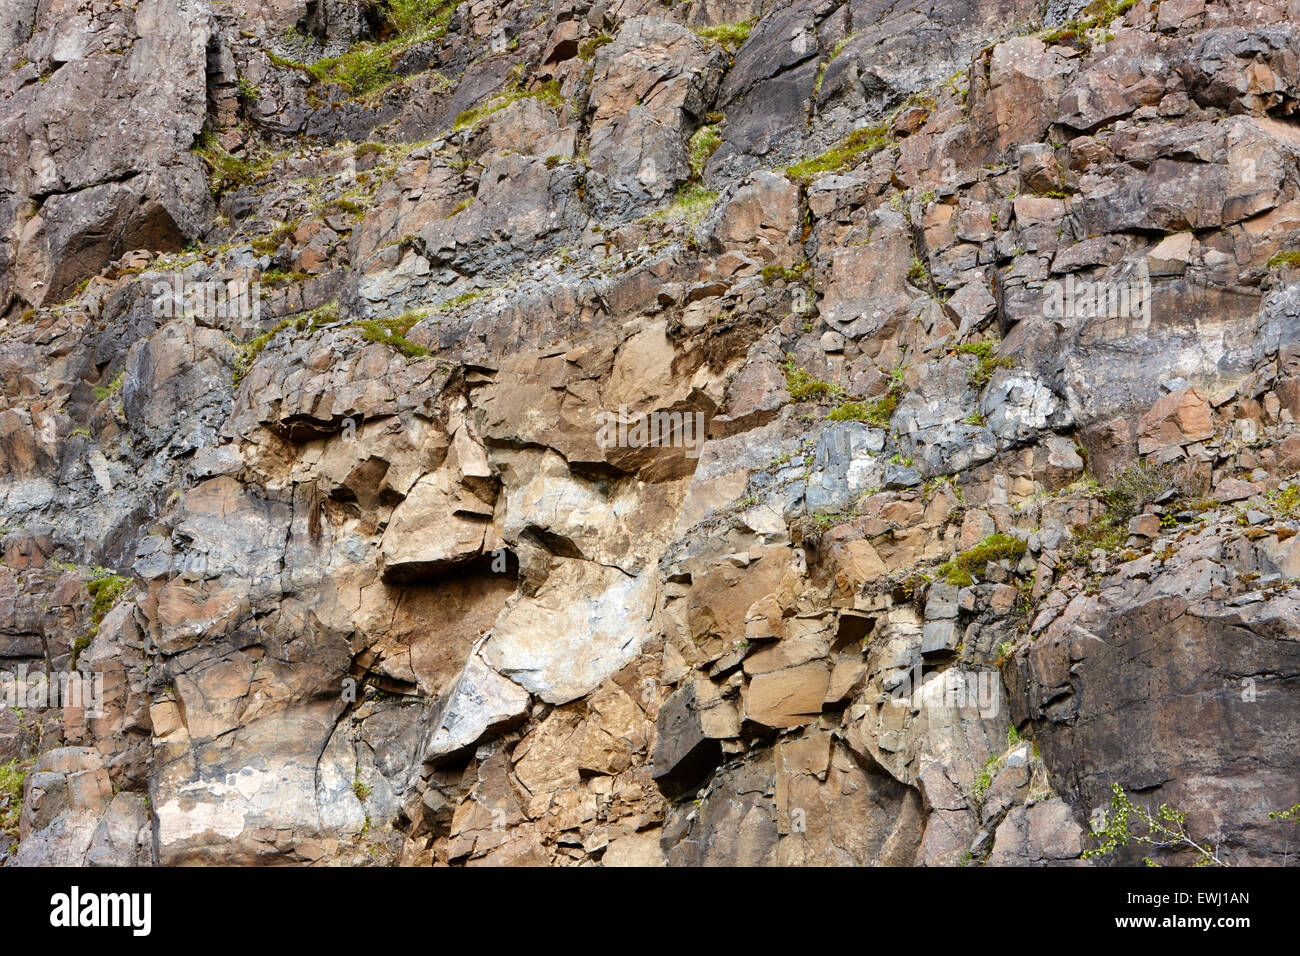 volcanic rock strata and dikes in basalt in hillside Iceland Stock Photo